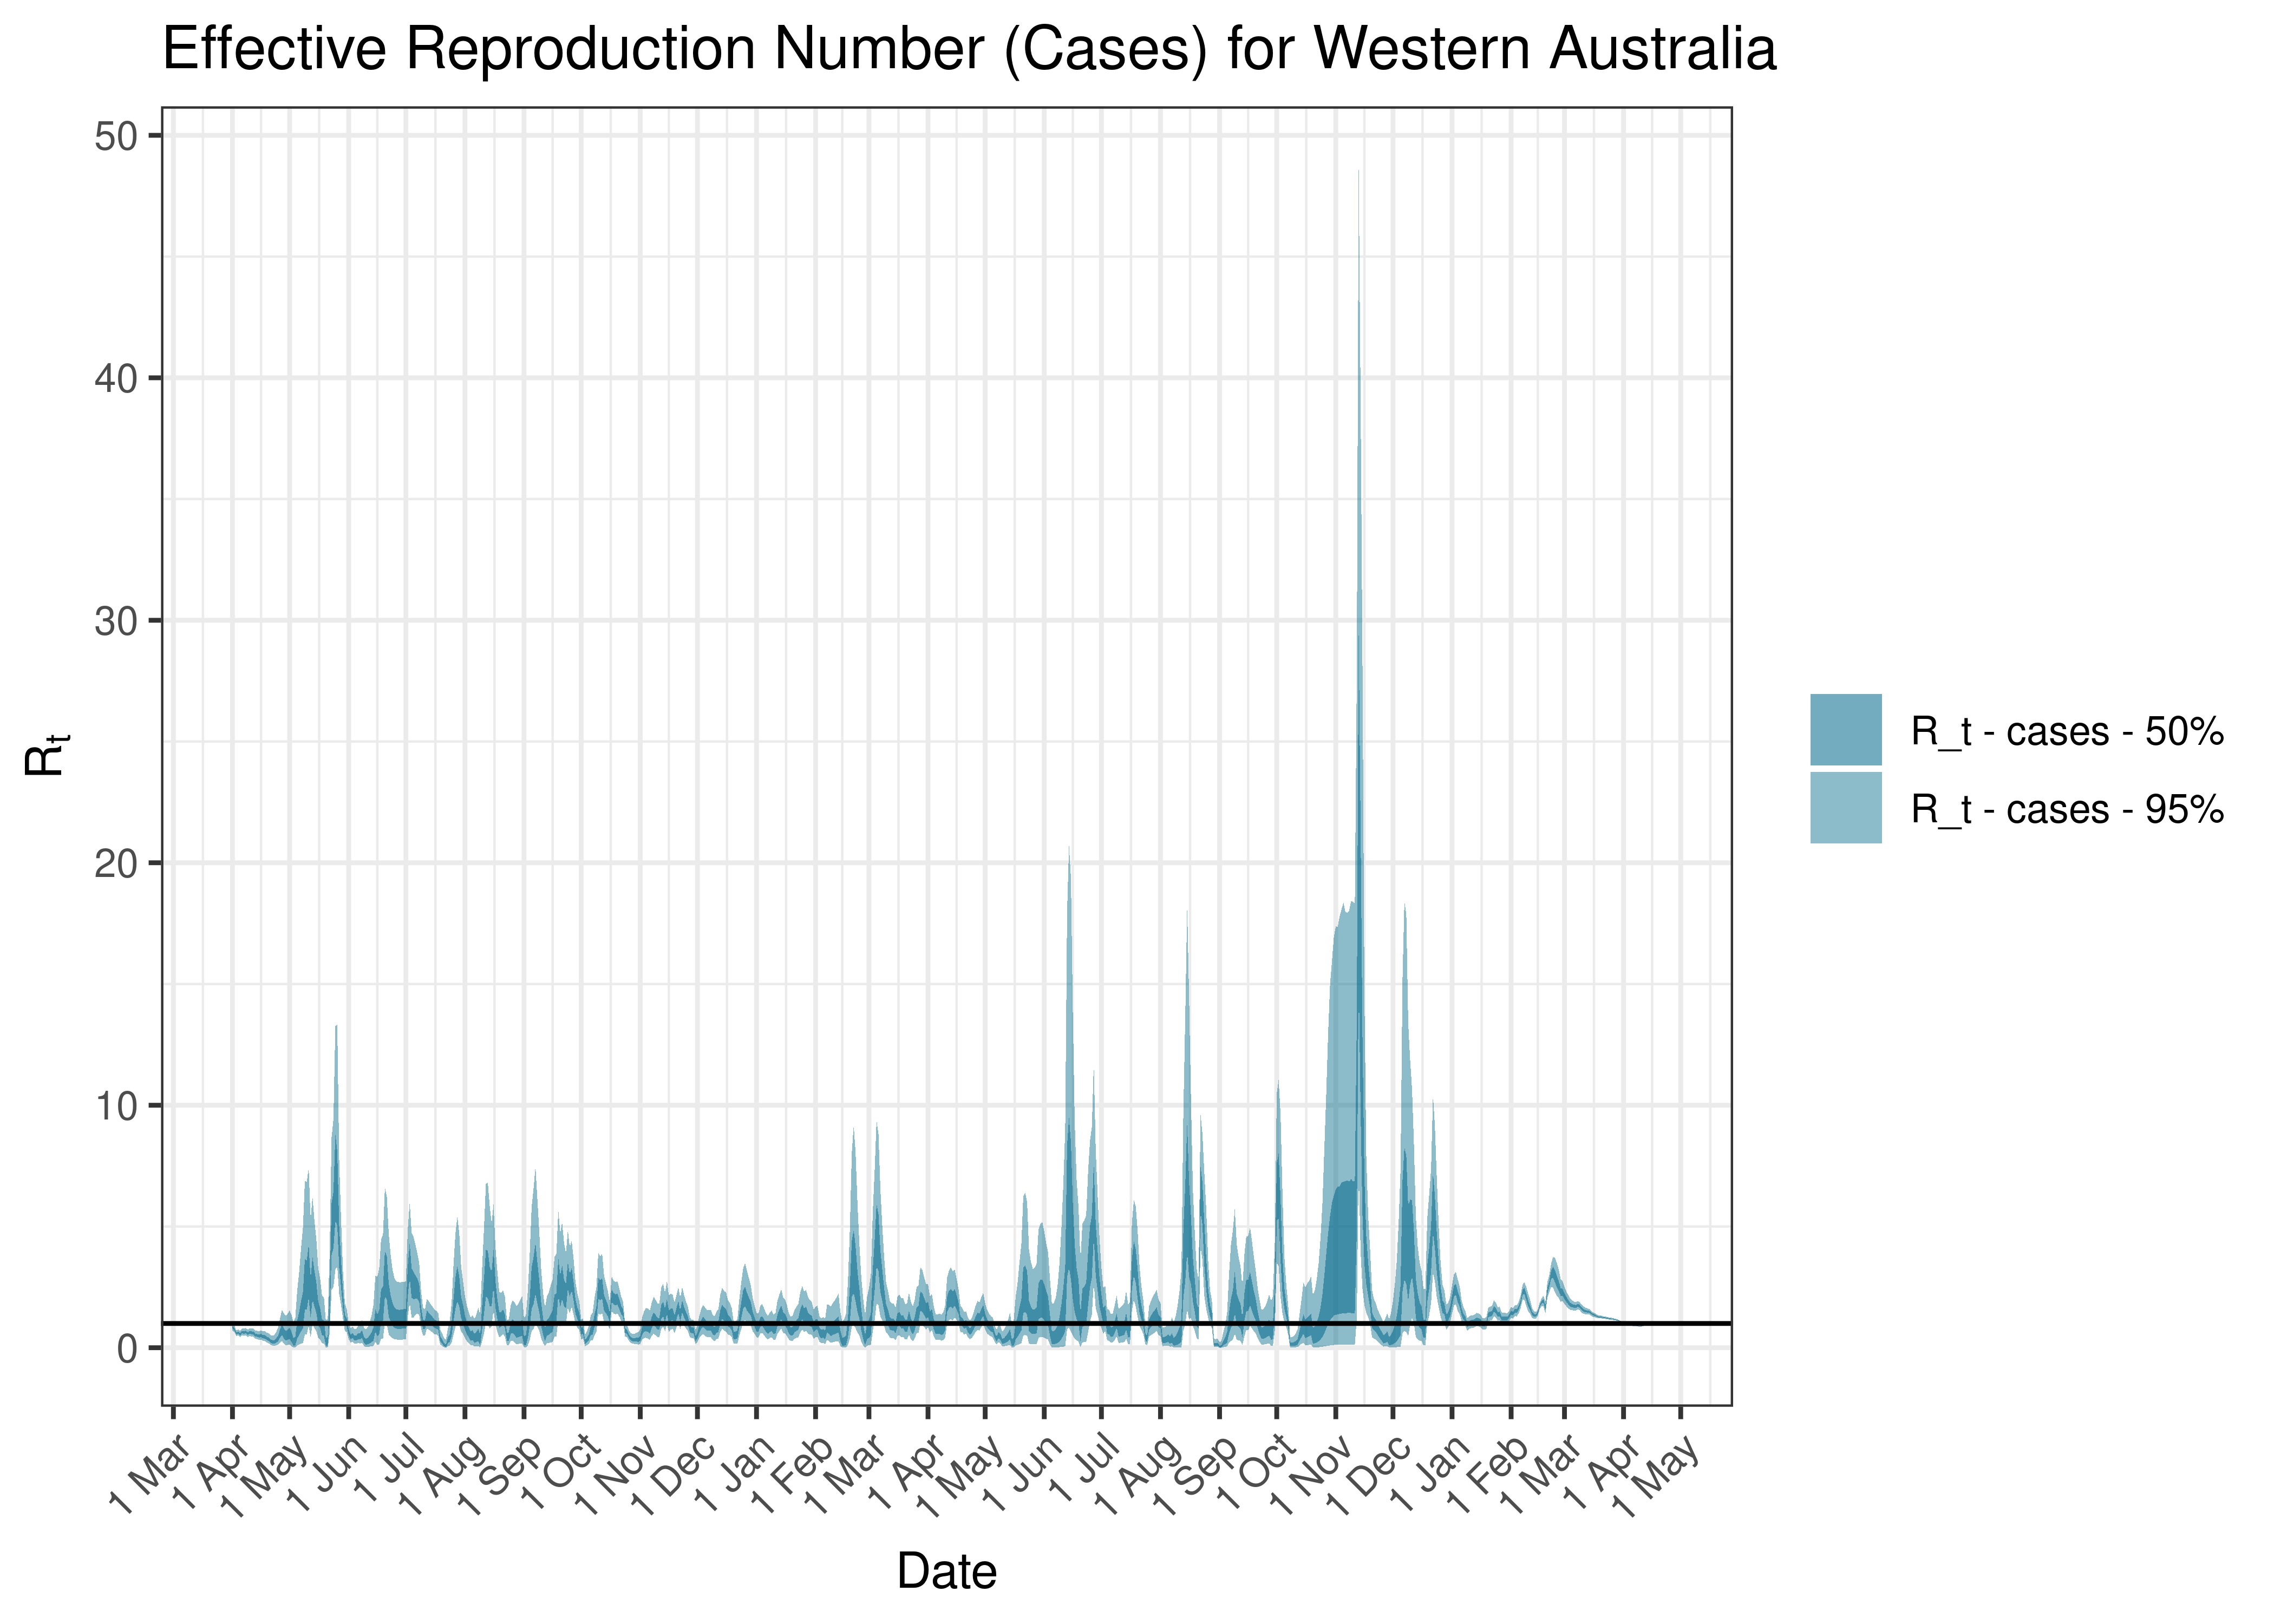 Estimated Effective Reproduction Number Based on Cases for Western Australia since 1 April 2020